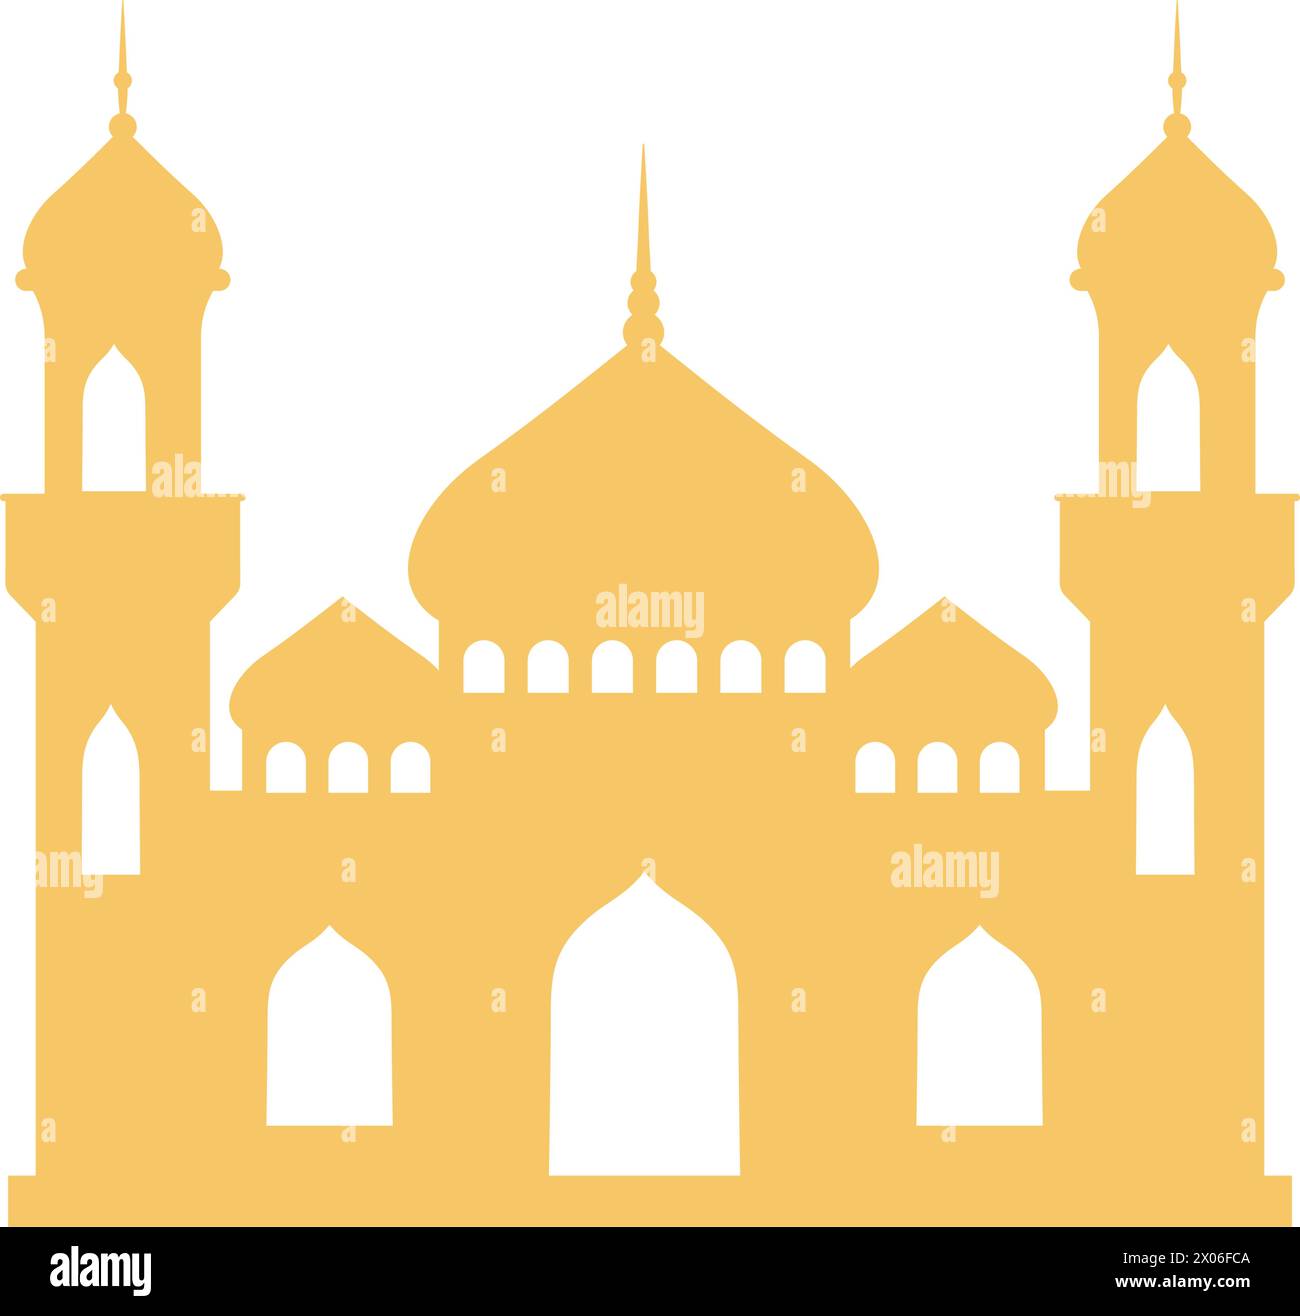 Silhouette of a muslim mosque building with a minaret. Mosque muslim arabic architecture religious graphics. Prayer building islamic culture. Flat Stock Vector